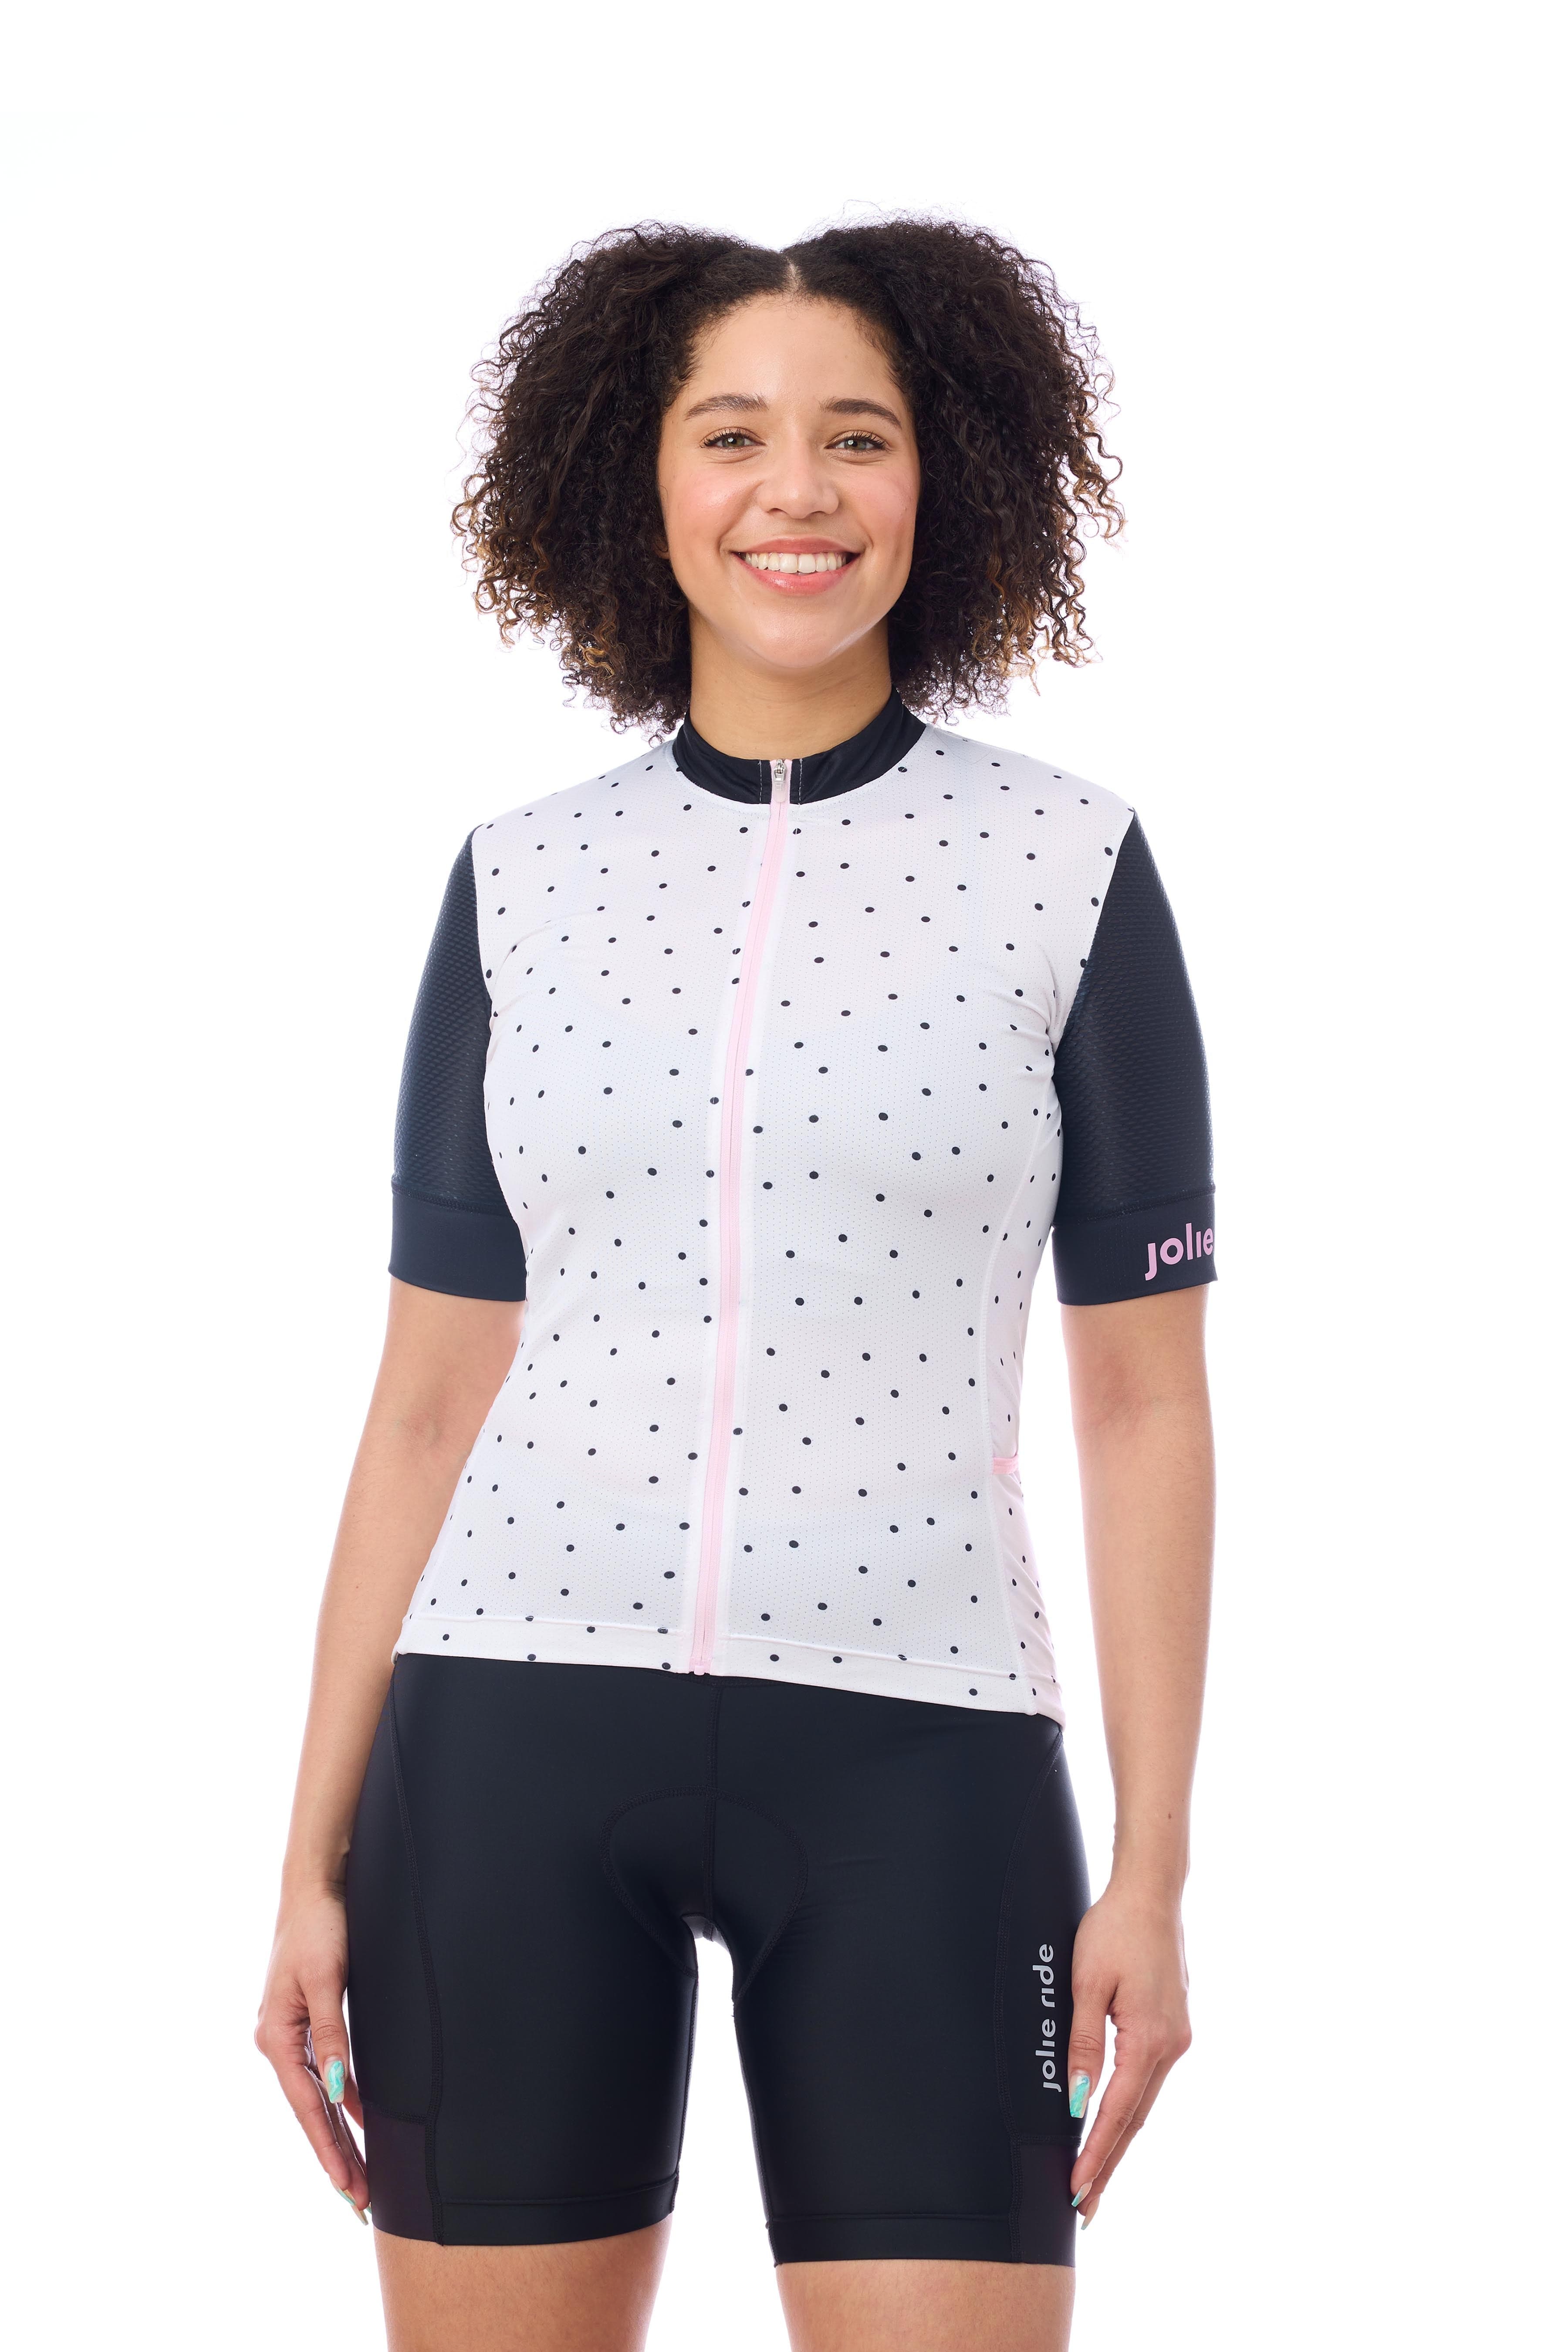 JolieRide Jersey women's cycling jersey with UV protection, breathability, and storage